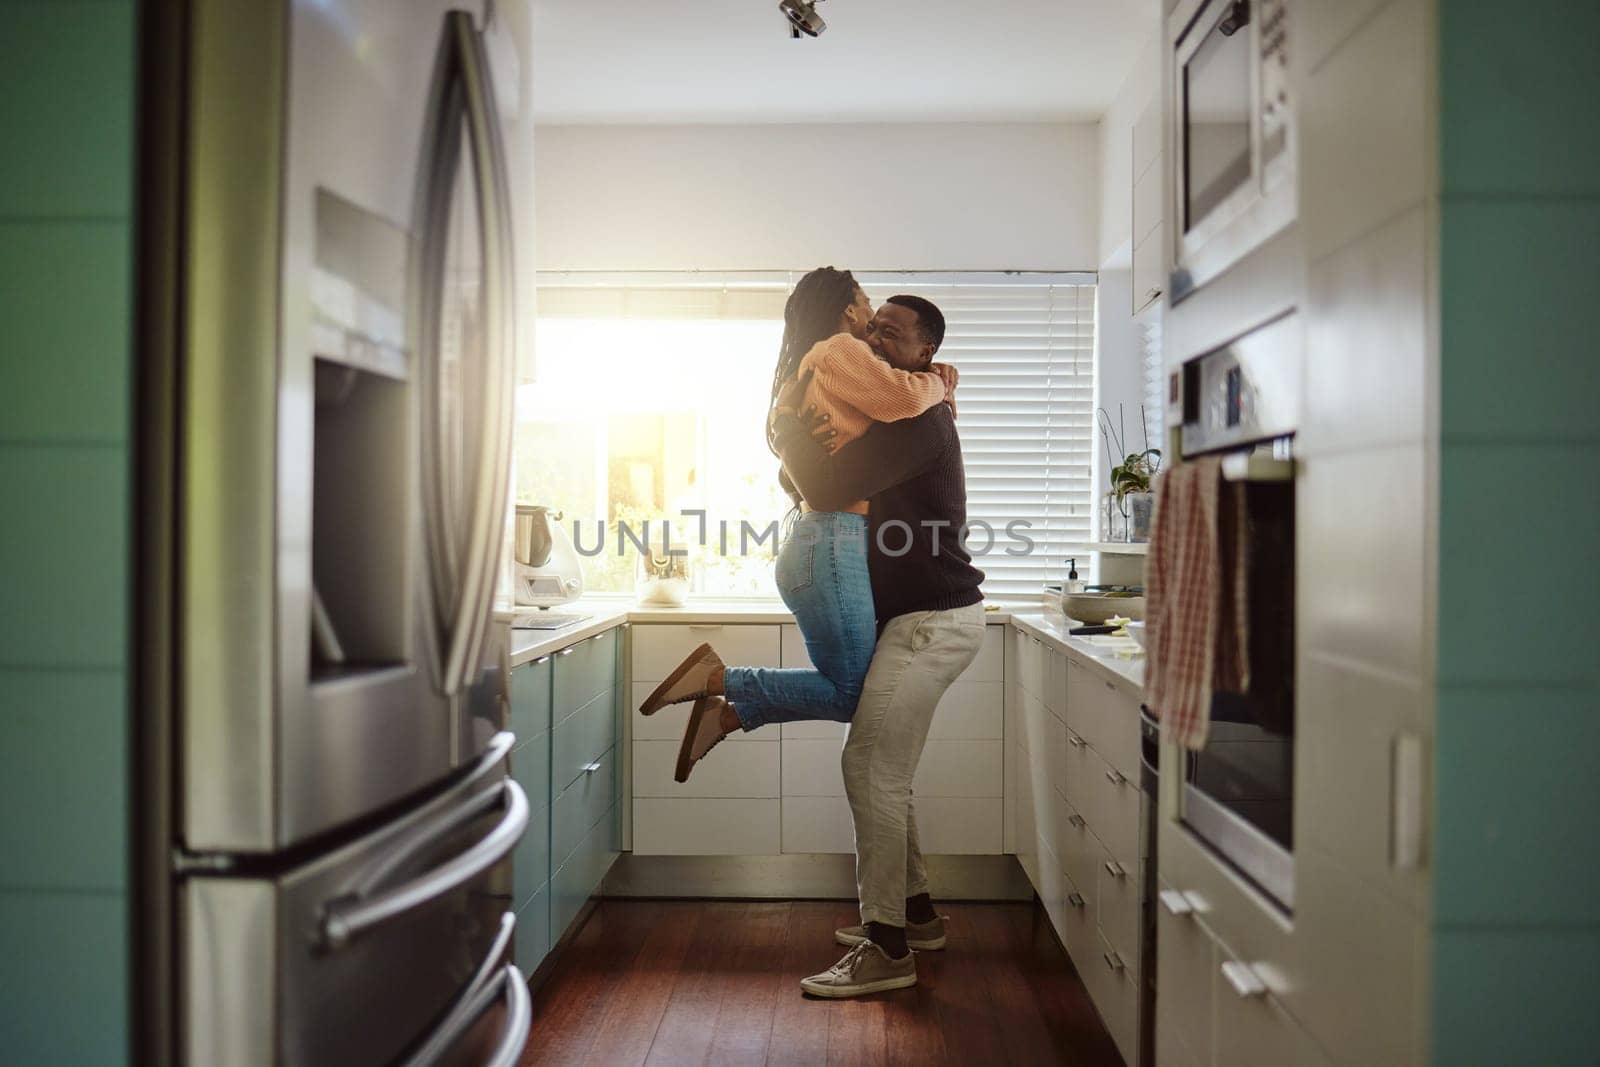 Black couple, happy home and love while together with care and happiness in a marriage with commitment and care. Young man and woman hug while in the kitchen to celebrate their house or apartment.